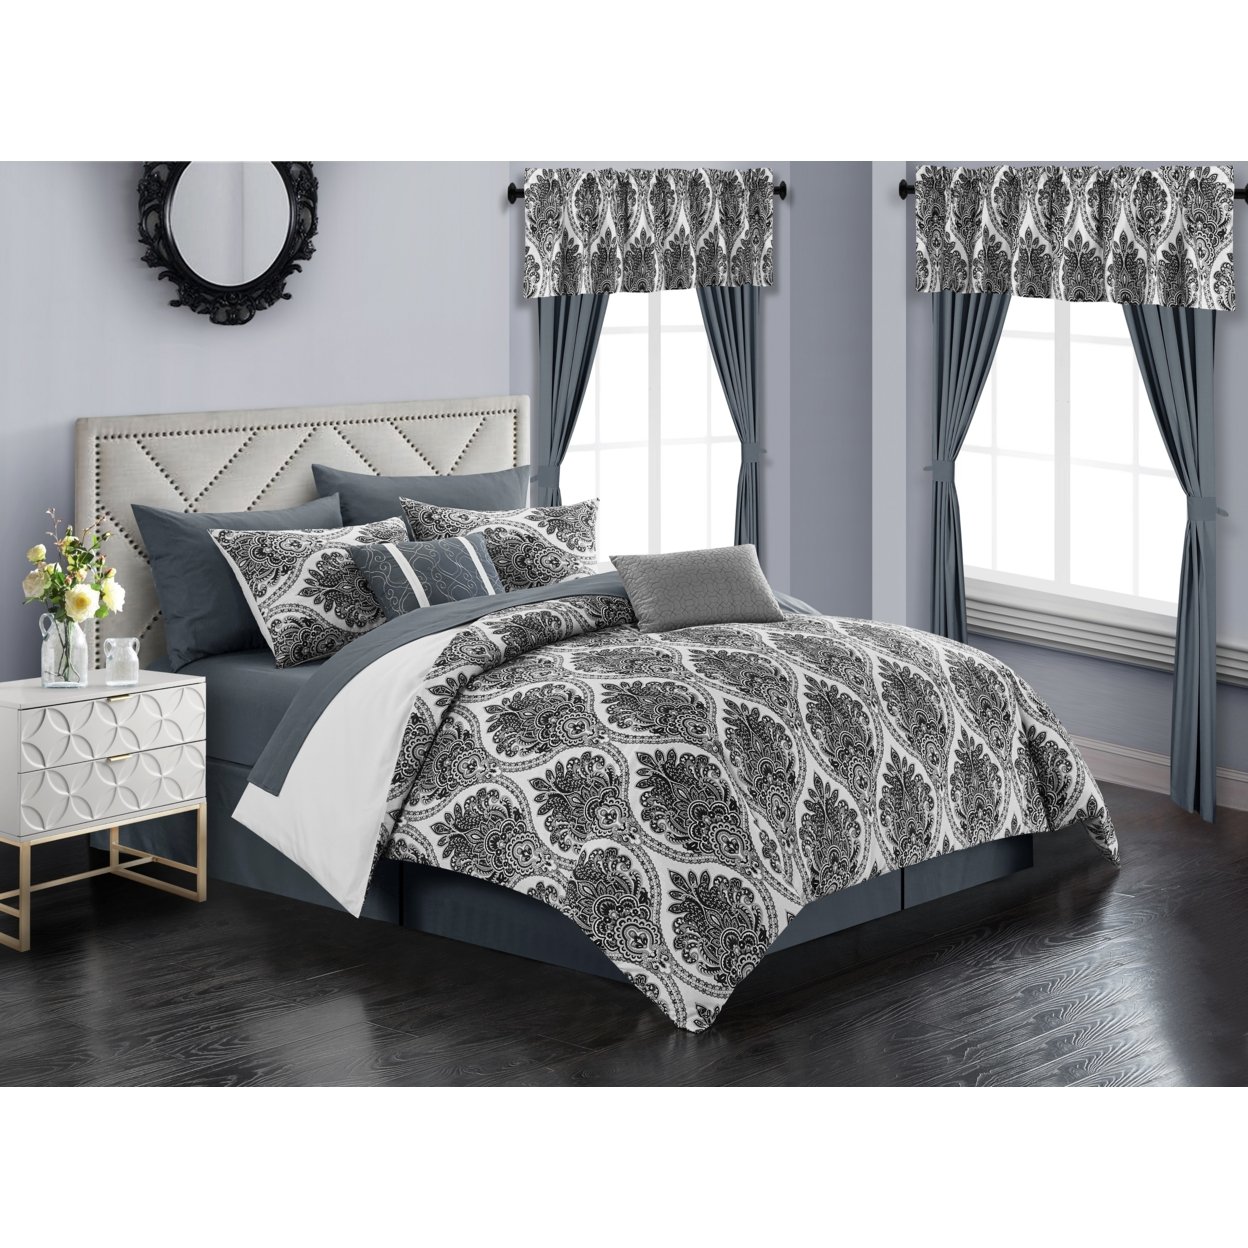 Vivaldi 20 Piece Comforter Set Medallion Quilted Embroidered Design Bed in a Bag Bedding - Grey, Queen